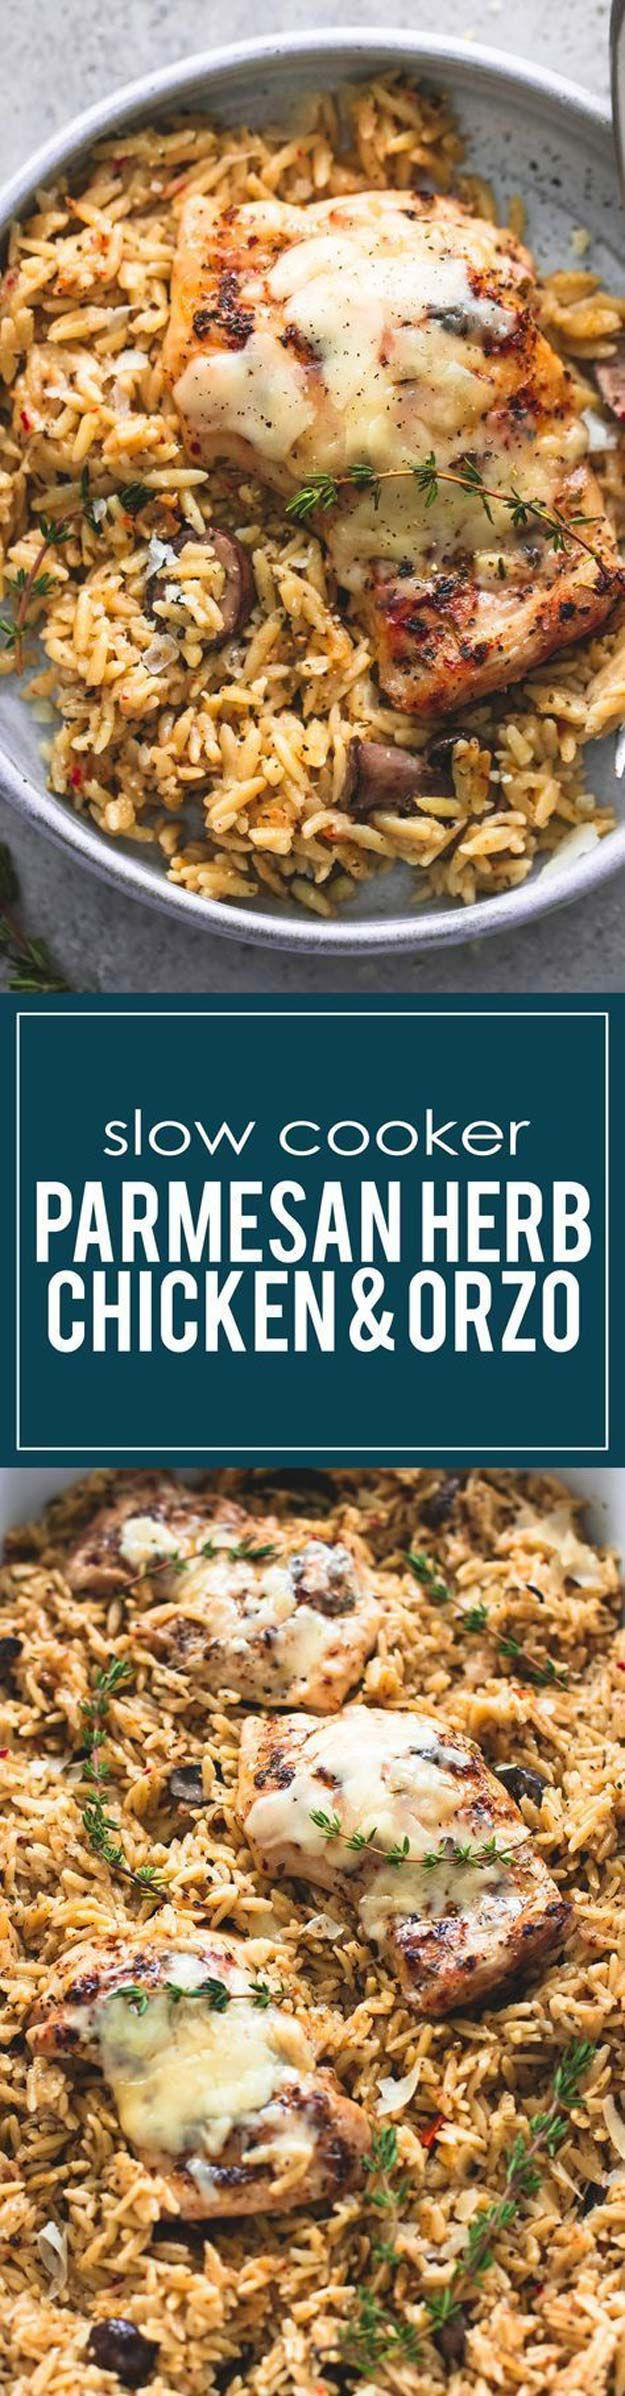 Healthy Slow Cooker Recipes For Two People
 Best 25 Healthy cheap meals ideas on Pinterest